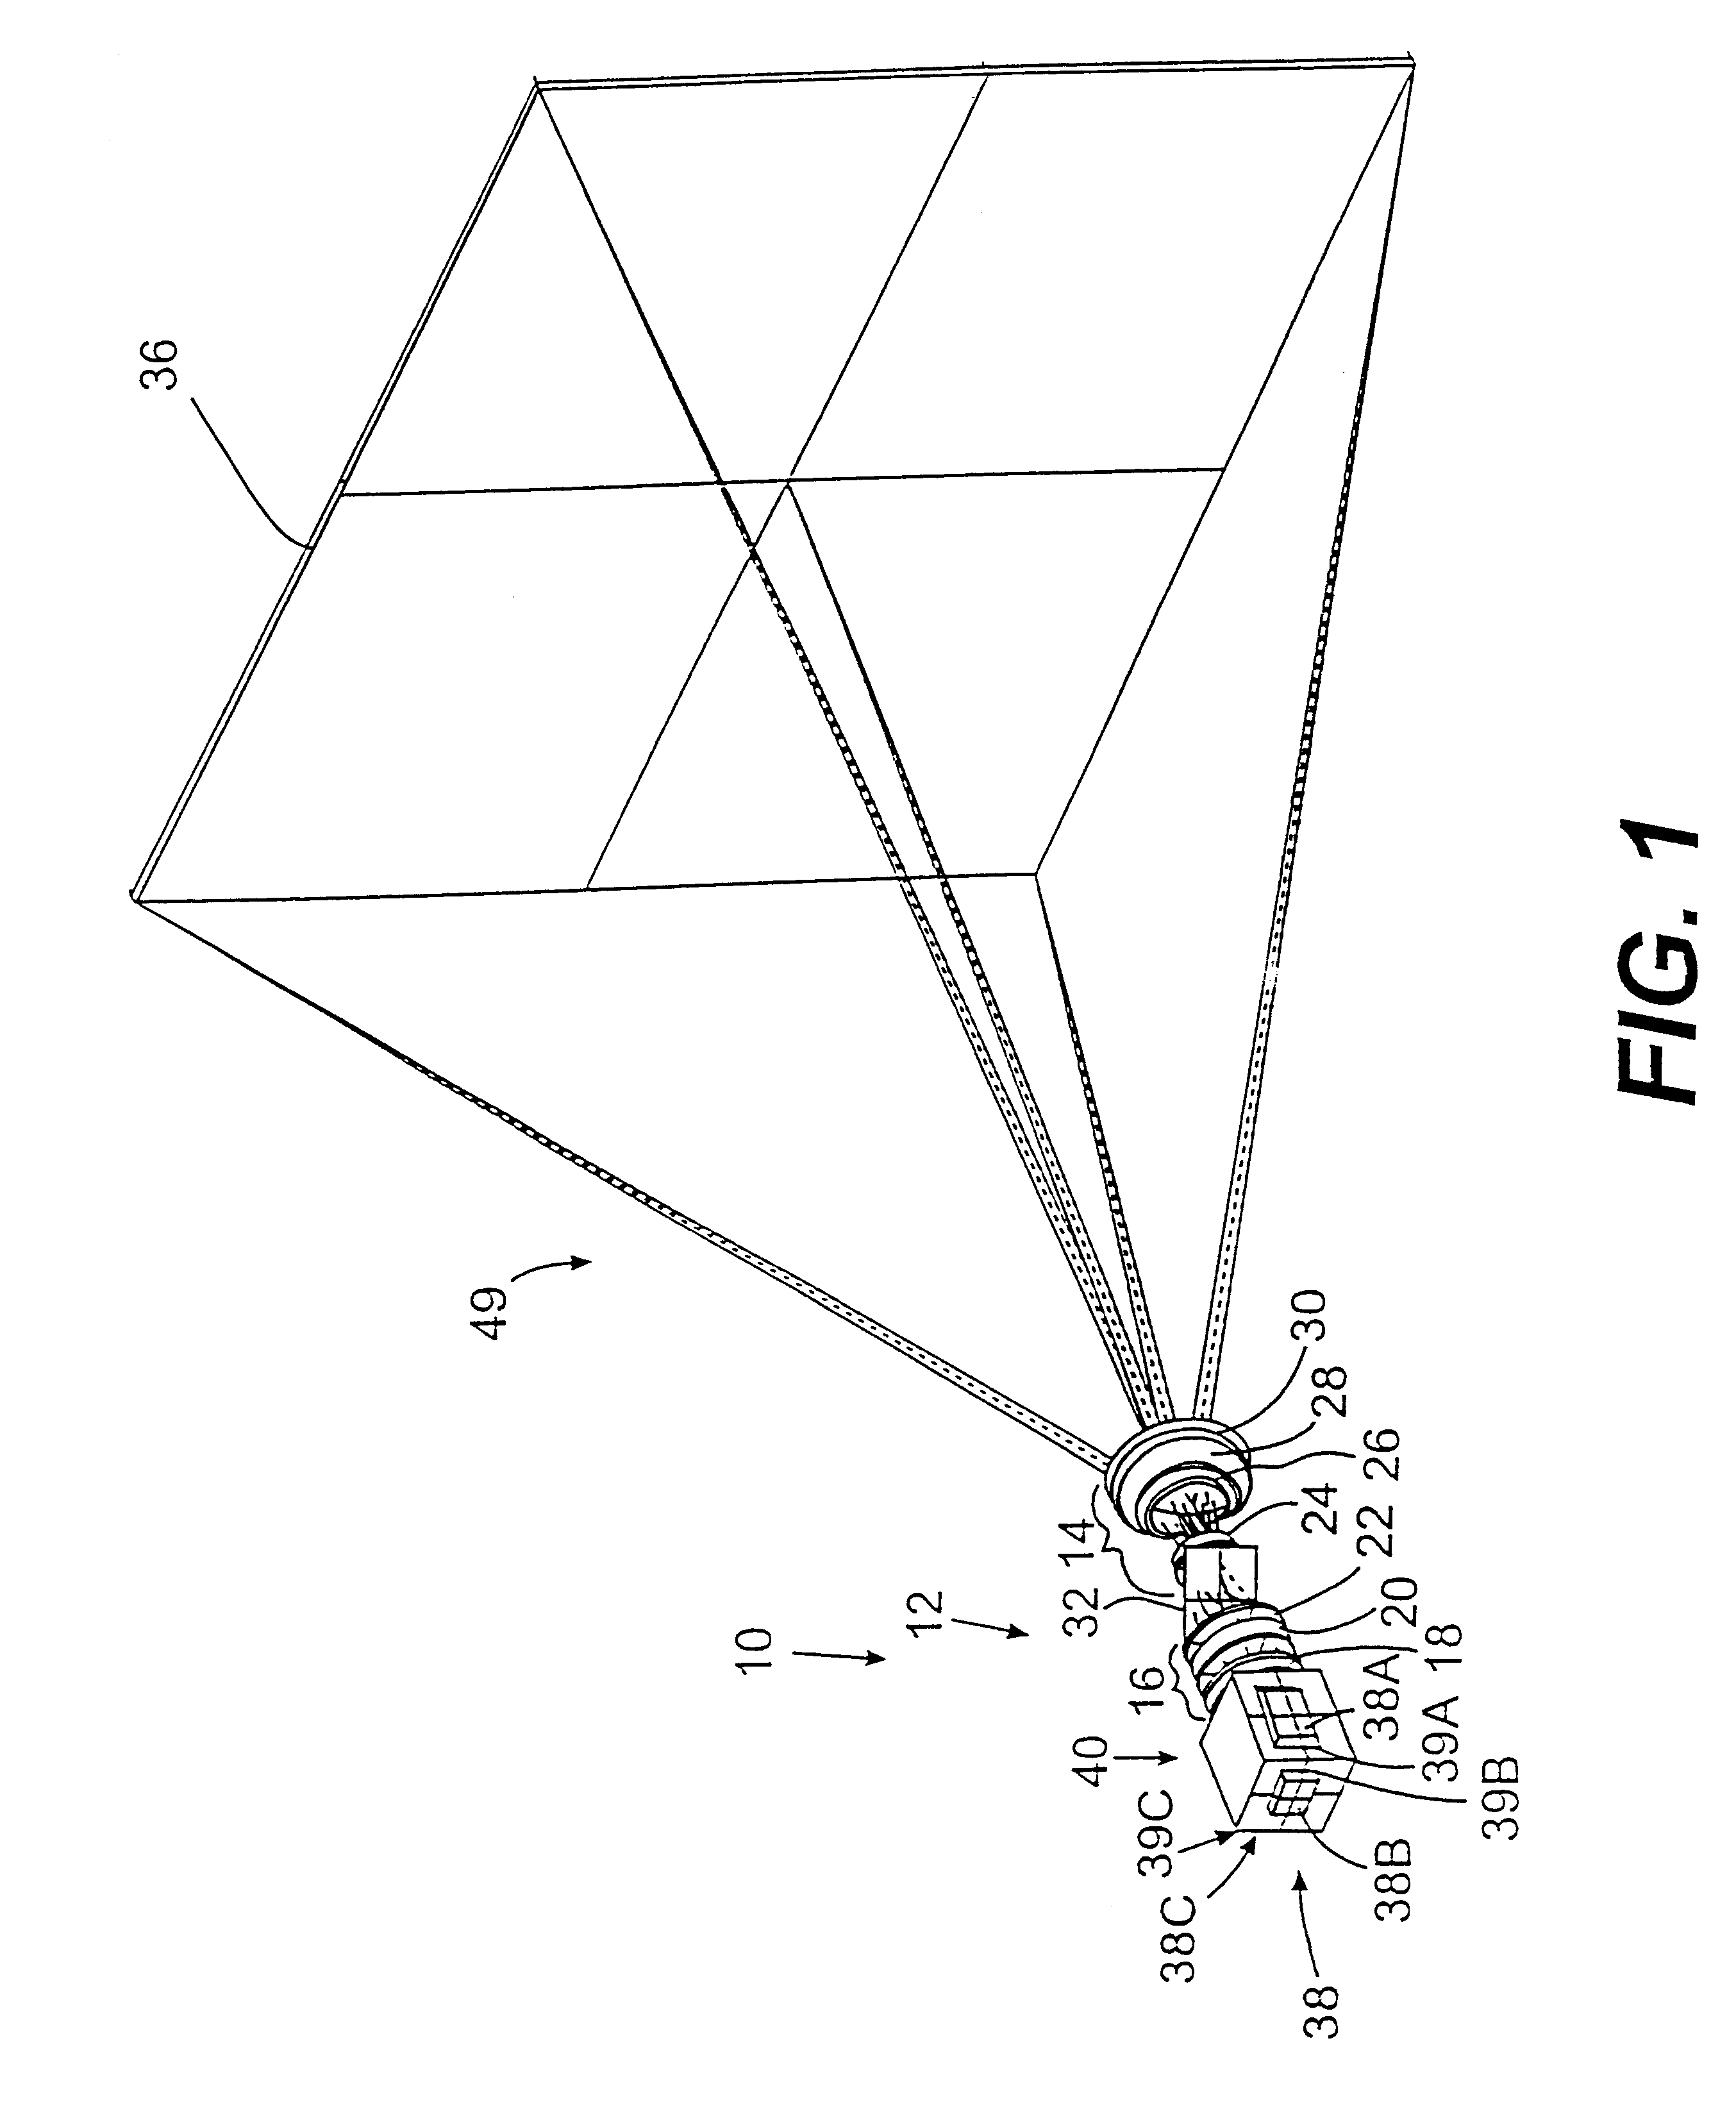 Thermalization using optical components in a lens system